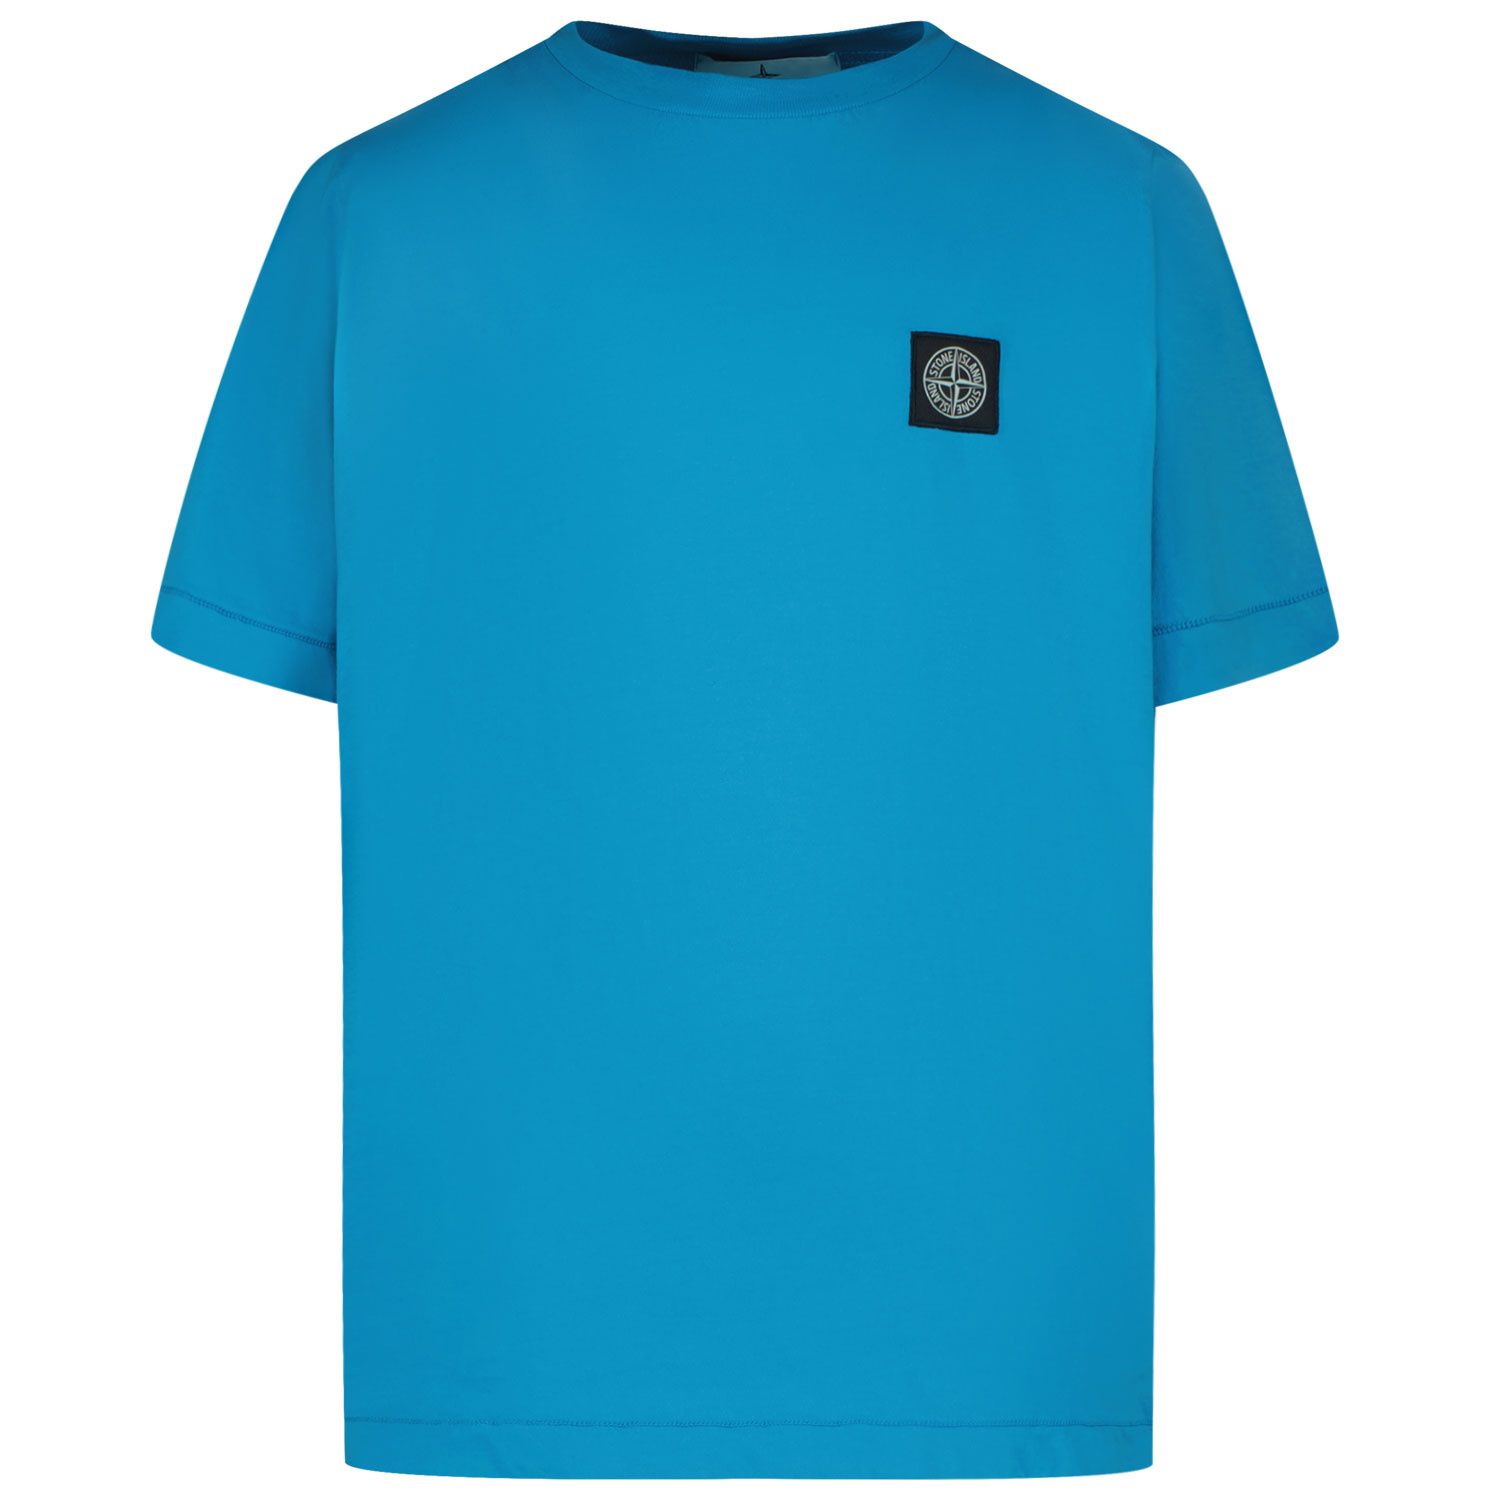 Picture of Stone Island 761620147 kids t-shirt turquoise